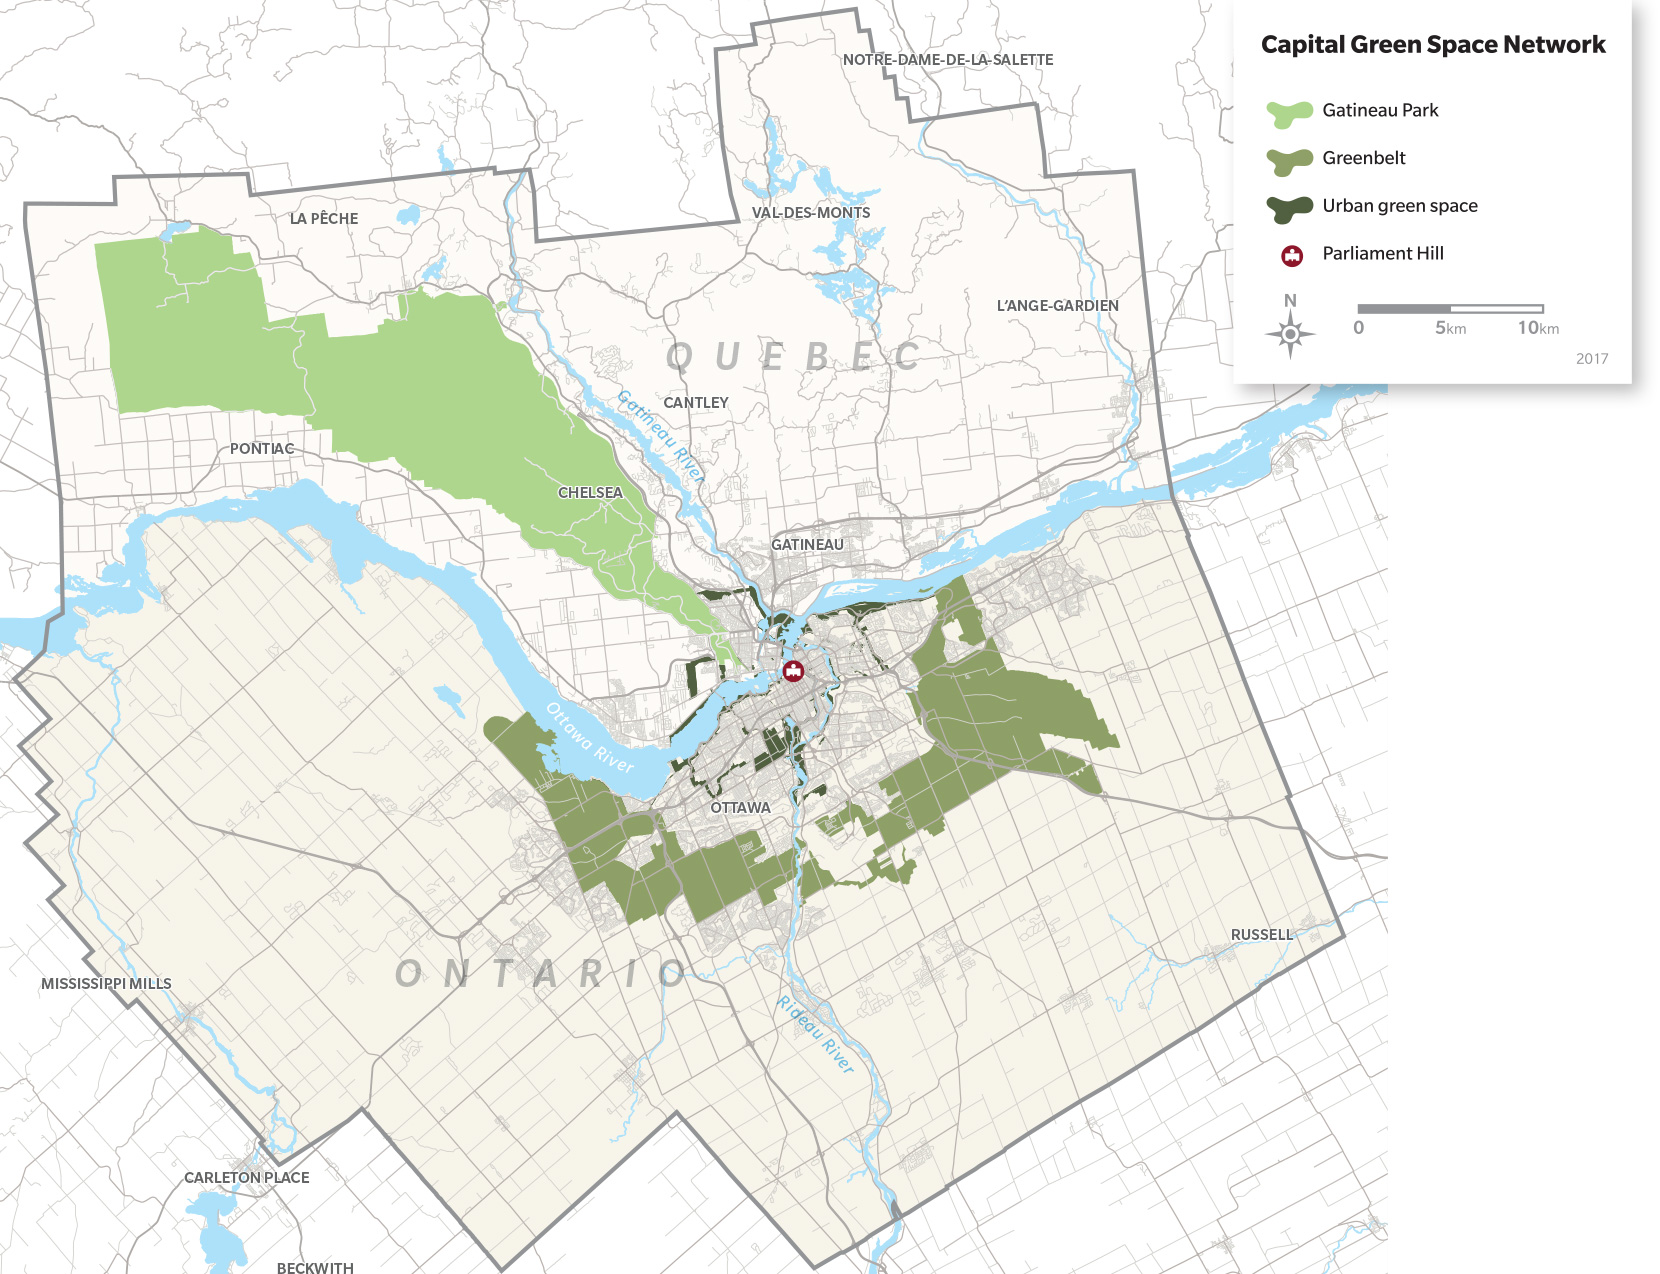 Capital Green Space Network